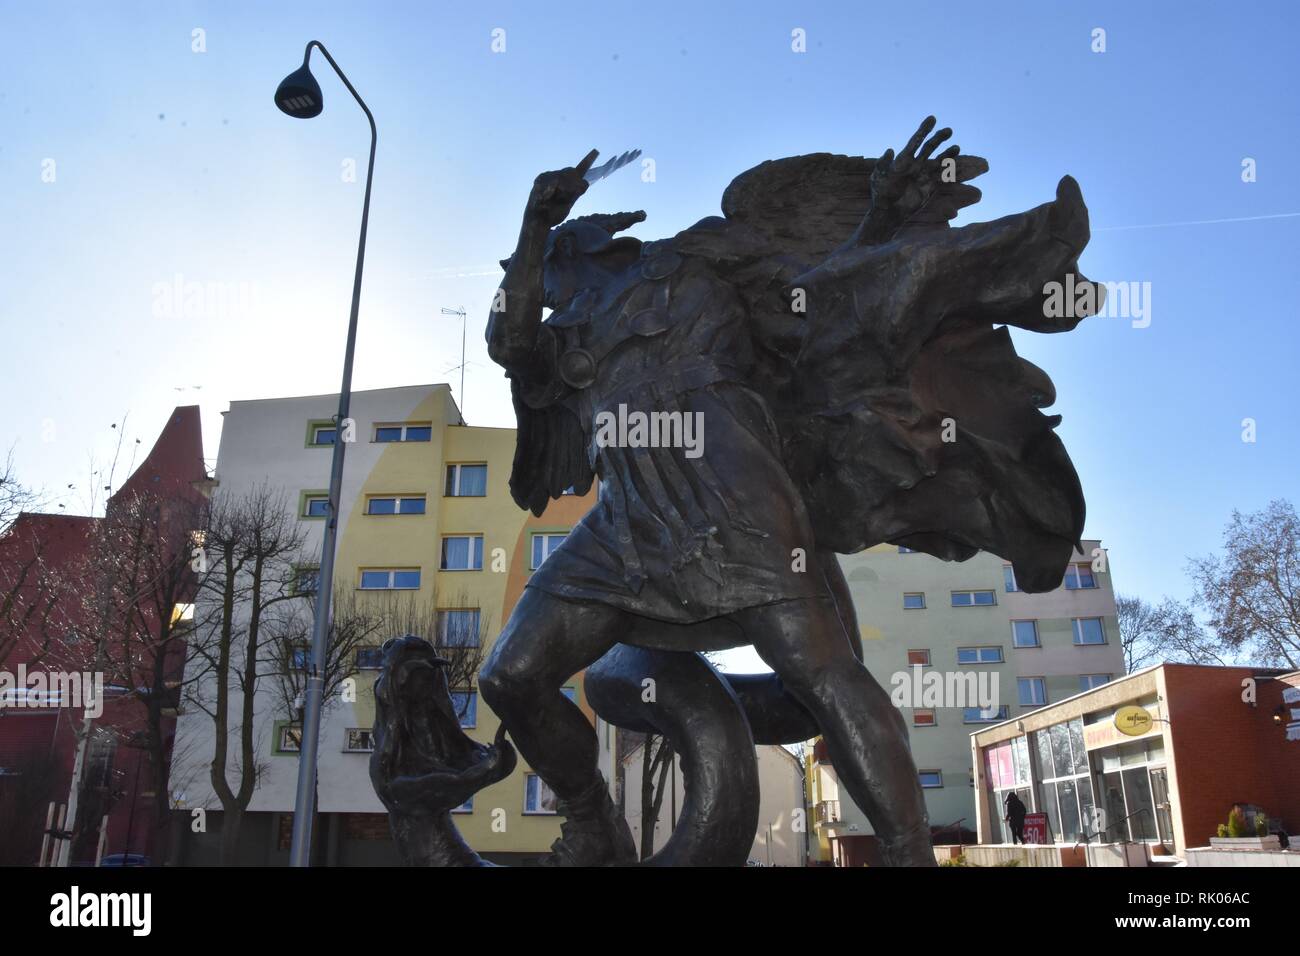 Lubin, Poland. 8th Feb, 2019. The monument of St. Michael the Archangel  founded the authorities of the city of Lubin in Poland. Money for the  monument comes from the city budget Credit: